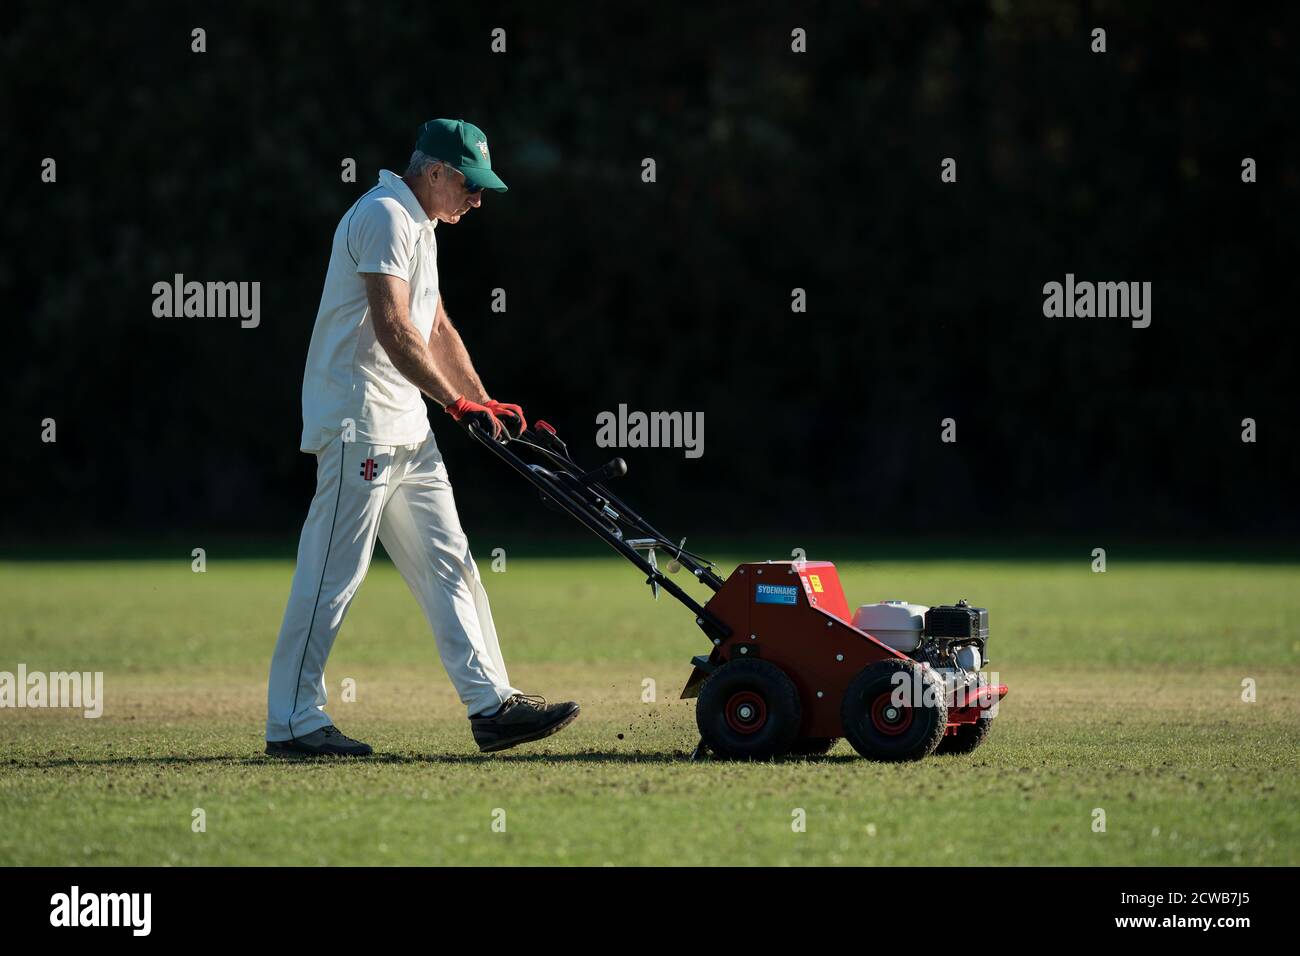 Scarifying pitch after last game of the season. Stock Photo